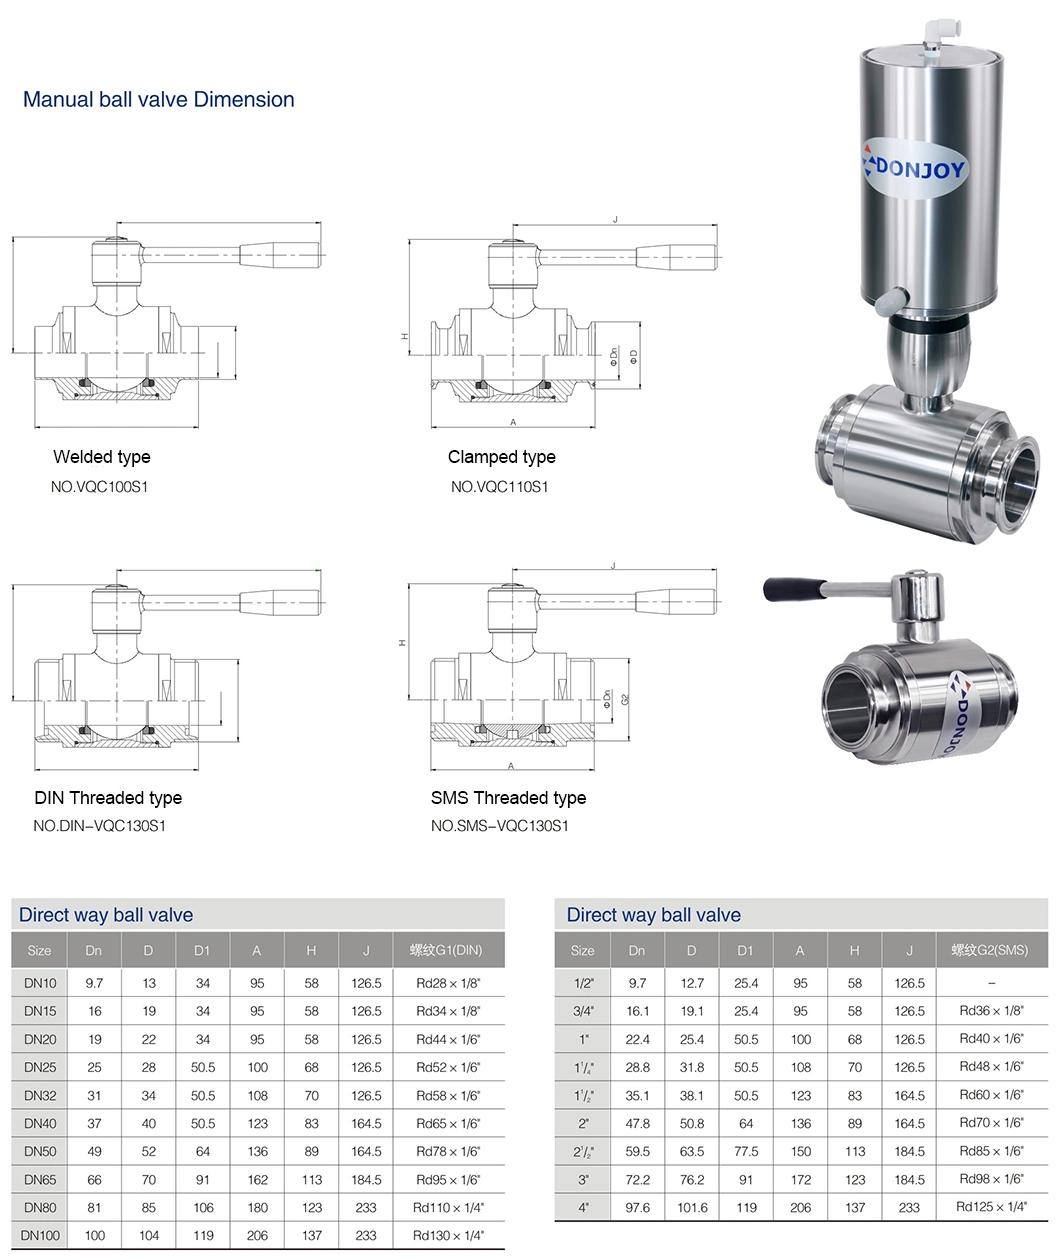 Food Grade PTFE Manual Ball Valve for Brewery Dairy Beverage